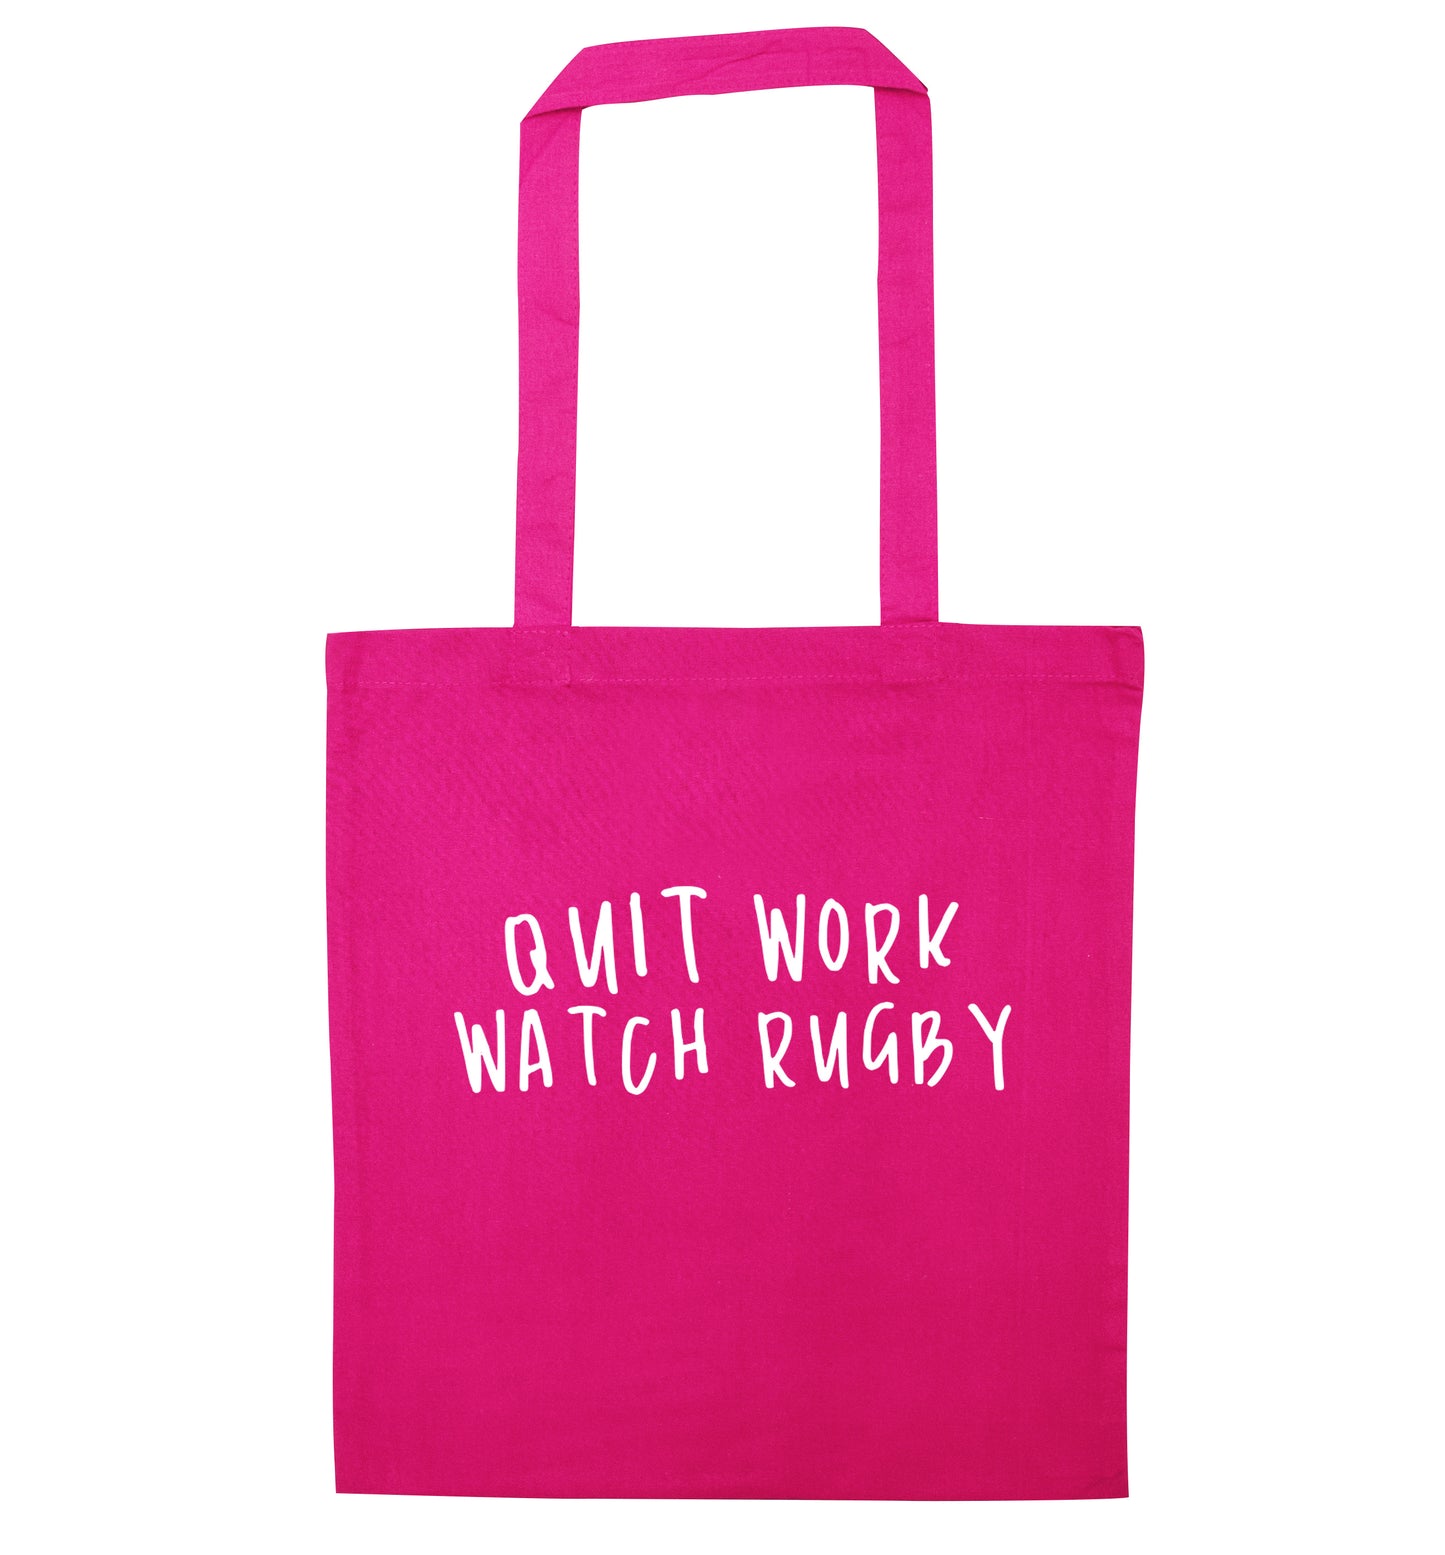 Quit work watch rugby pink tote bag